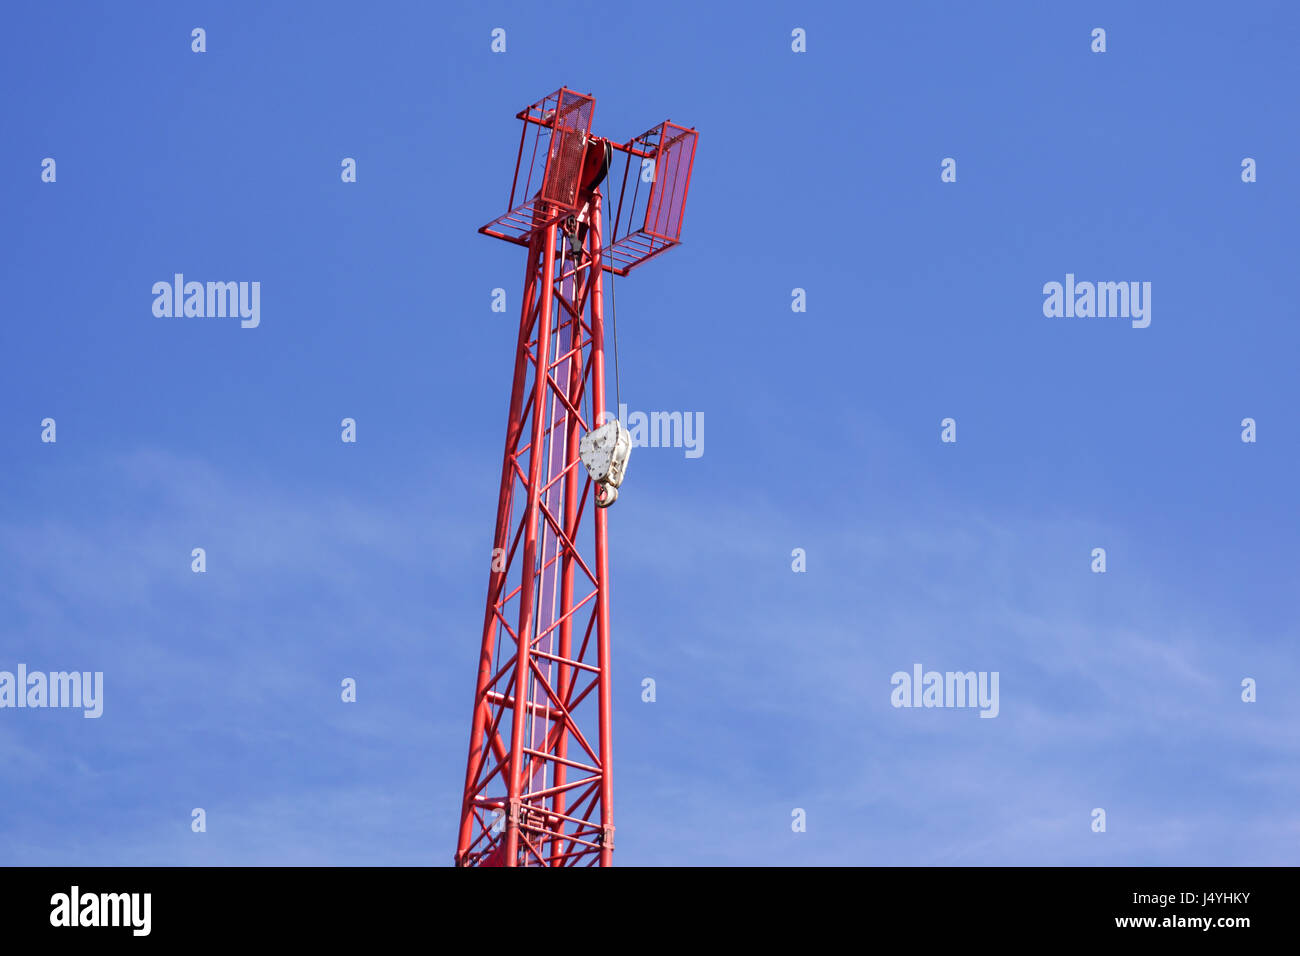 Red industrial construction crane against blue sky Stock Photo